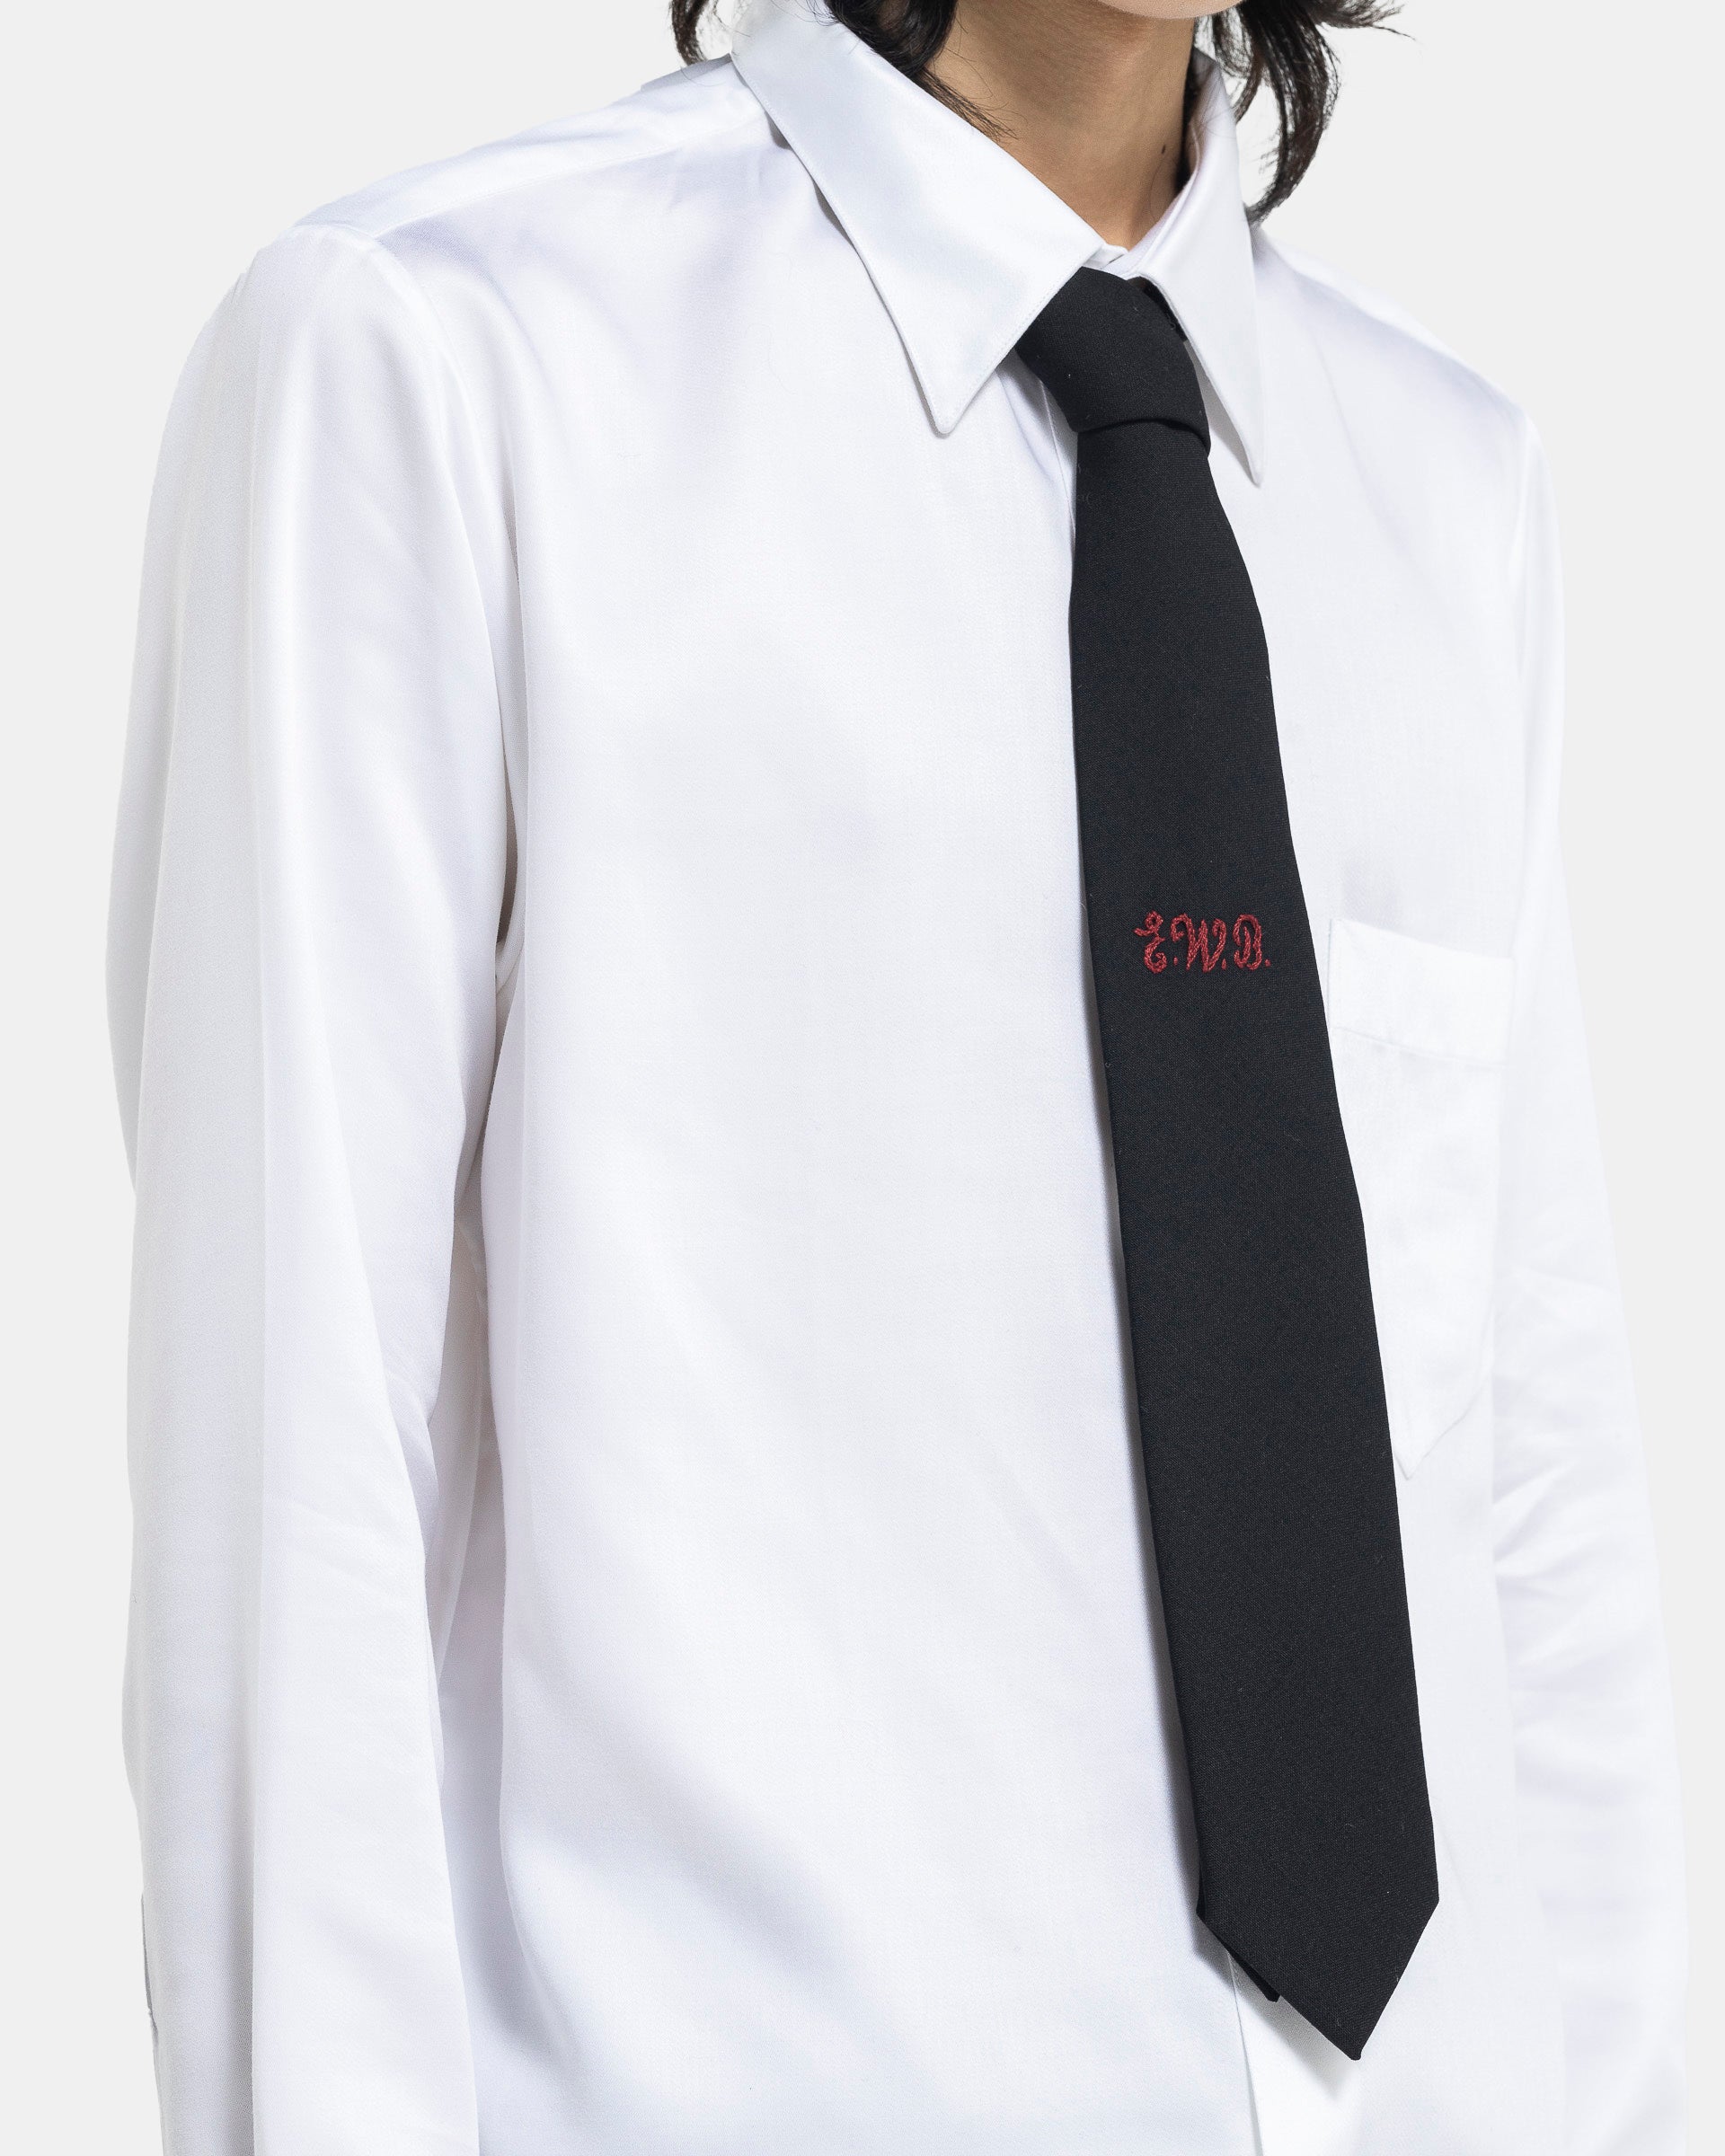 EWB Embroidered Tie in Black